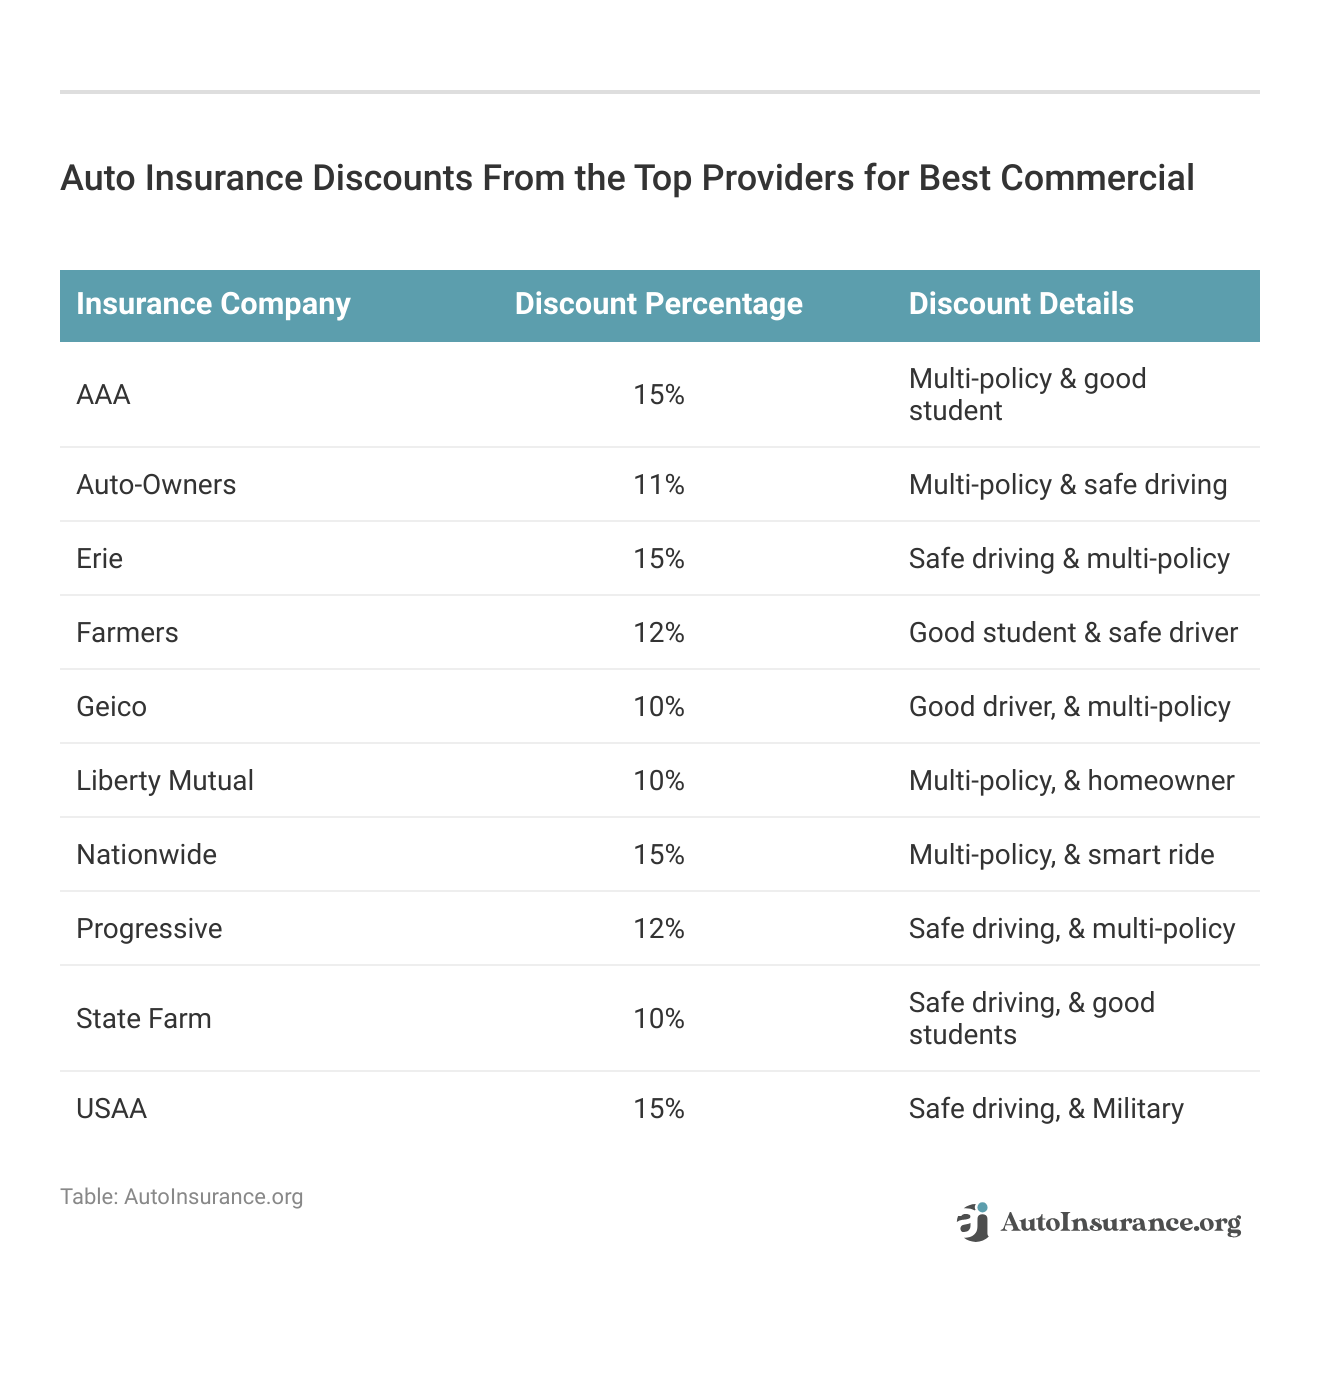 <h3>Auto Insurance Discounts From the Top Providers for Best Commercial</h3>